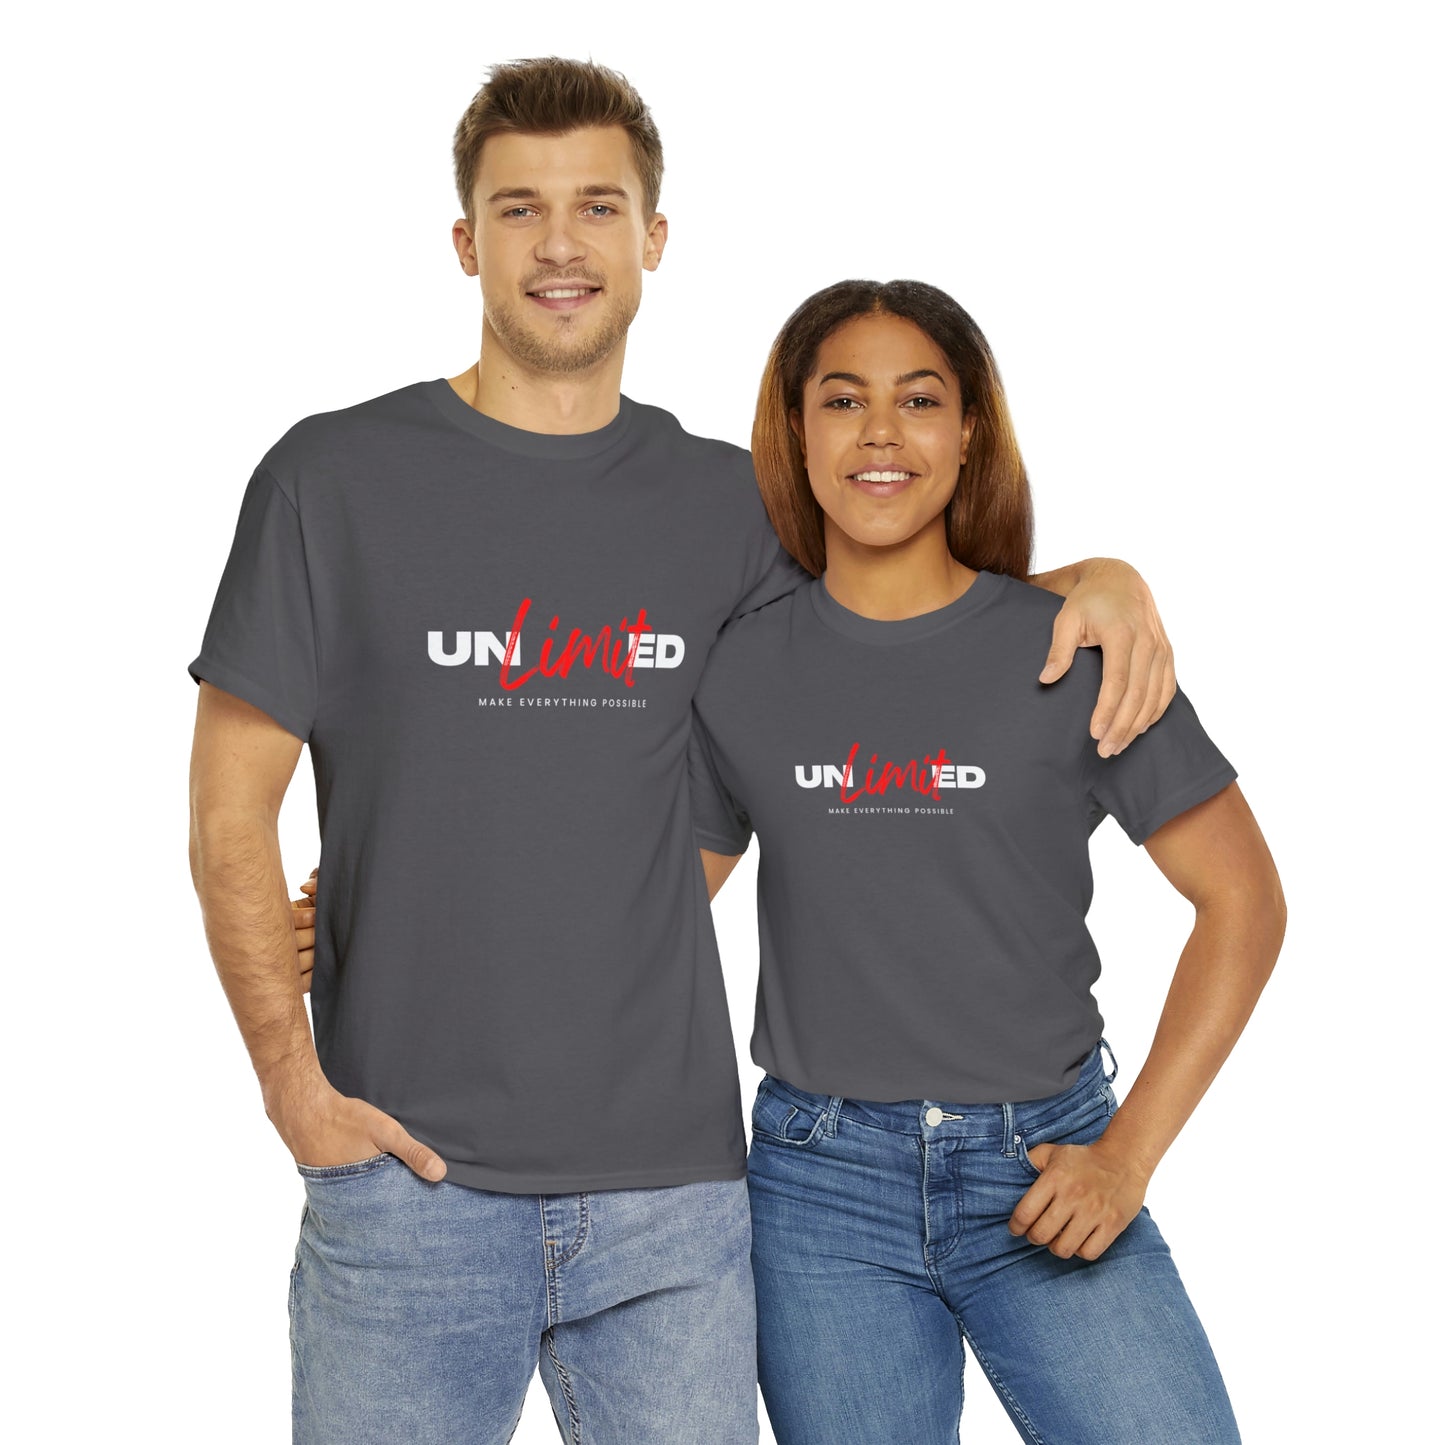 Unlimited Your Style  Our Custom Printed Tee Unique Design Comfortable Fit  Personalized for You.  color, funny tshirt tee shirt motivation